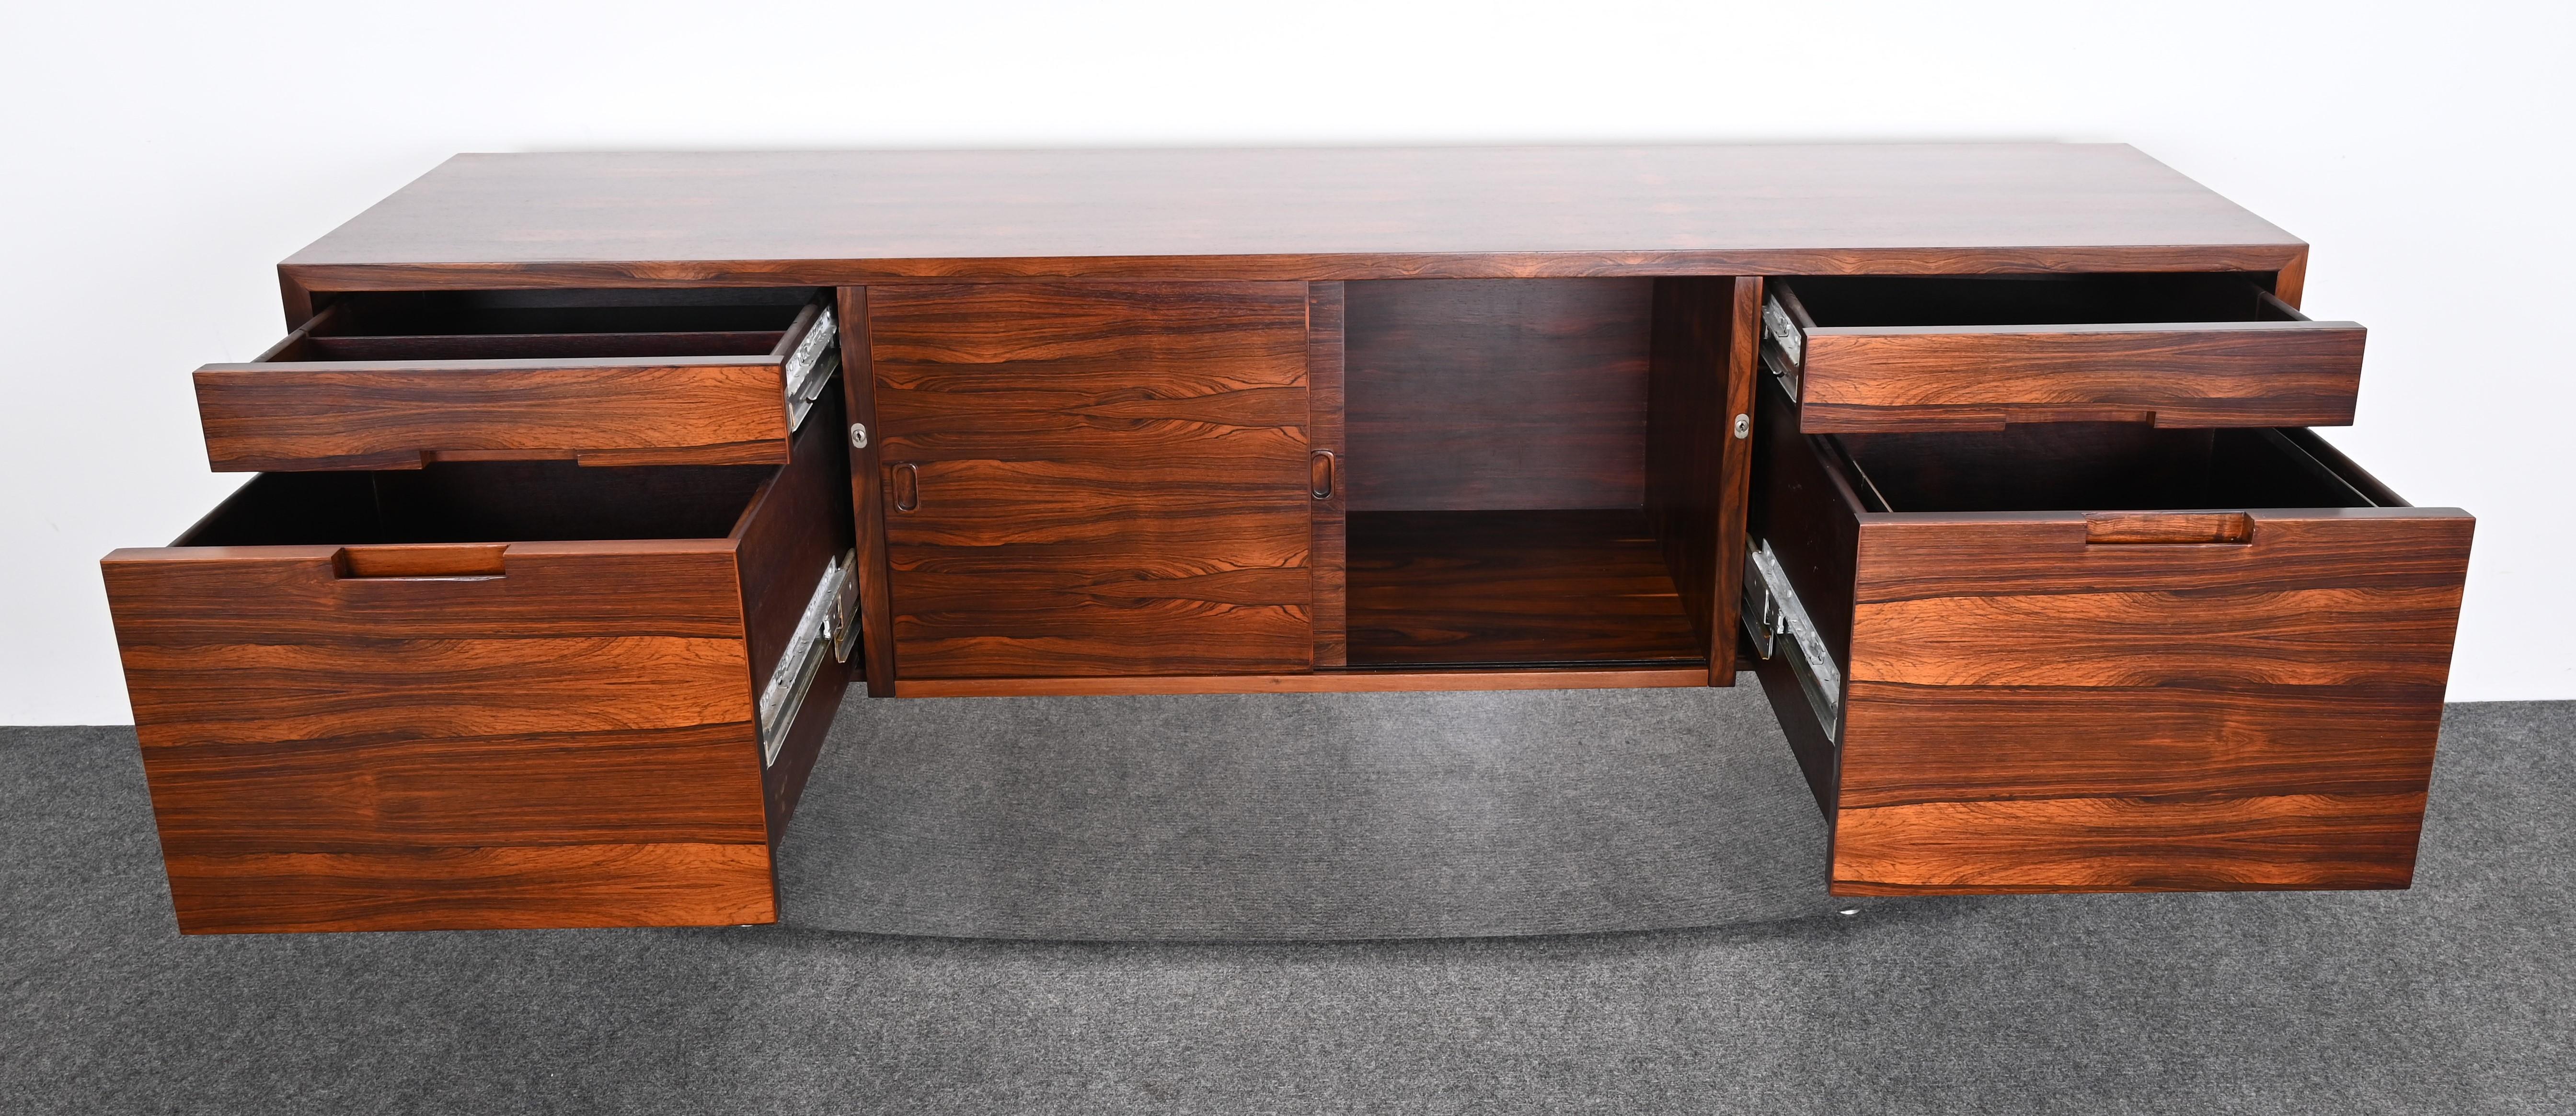 Danish Rosewood and Chrome Credenza, 1960s For Sale 9